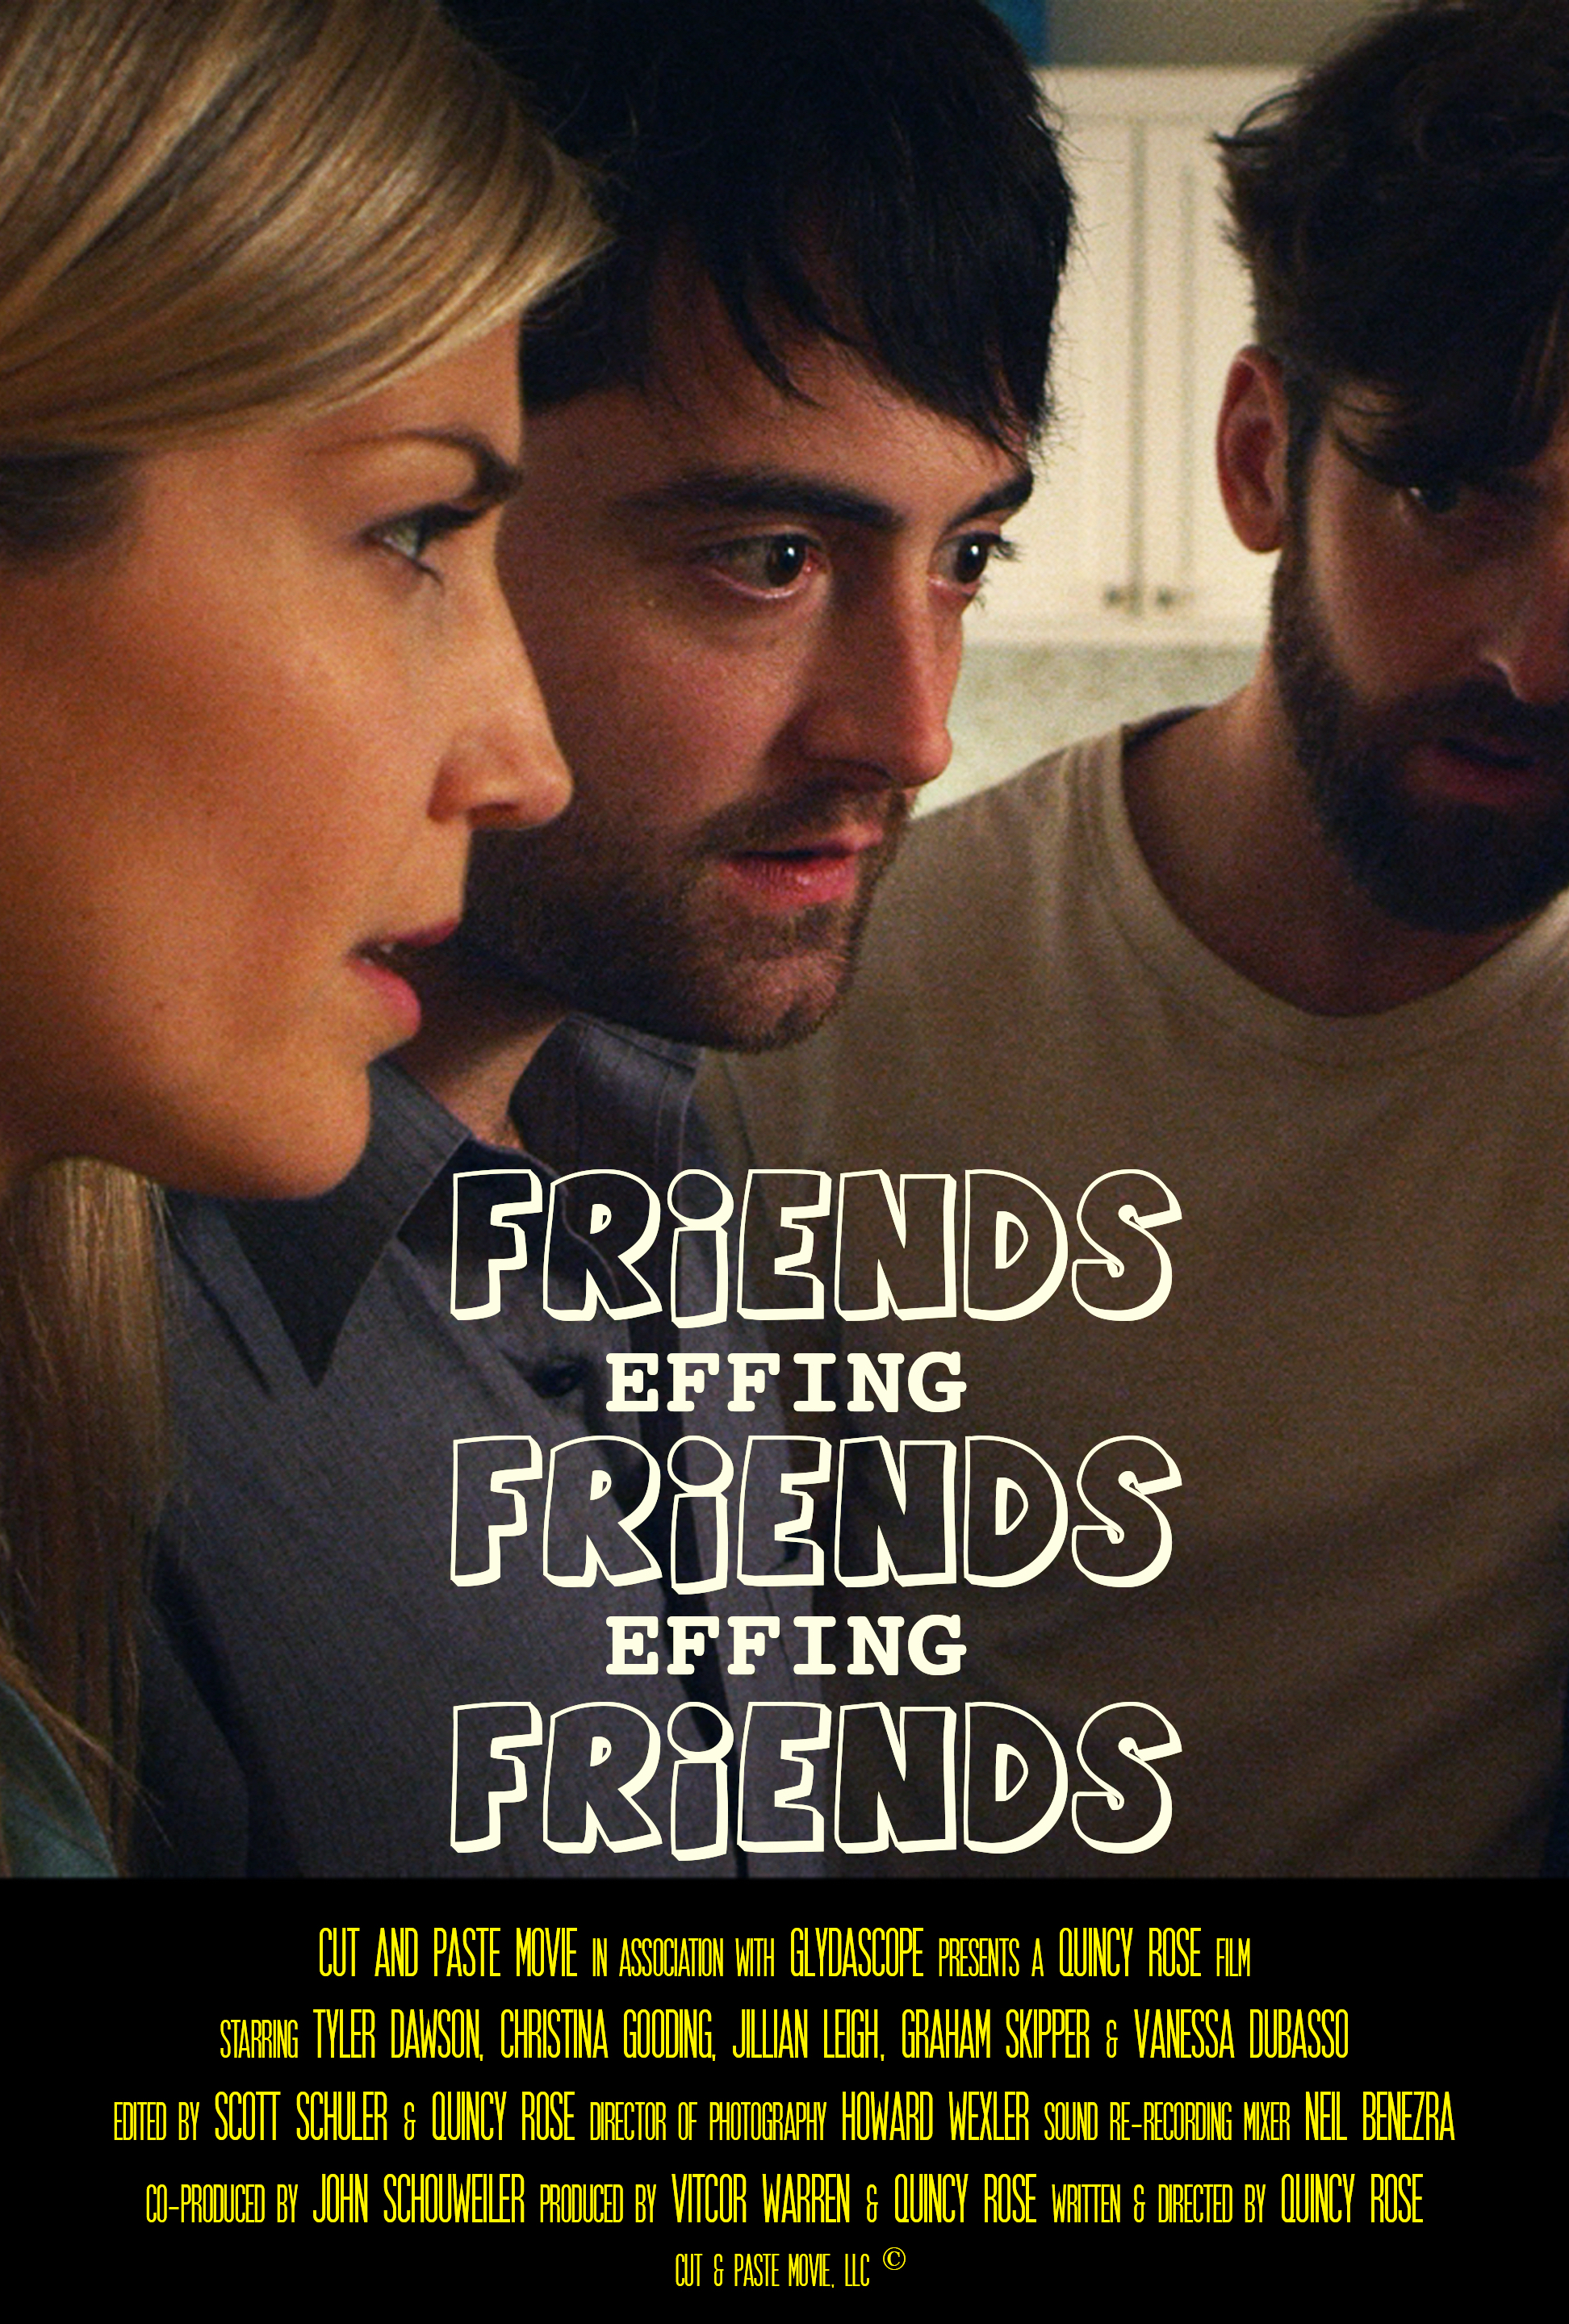 Official Poster #2 for the feature comedy-drama FRIENDS EFFING FRIENDS EFFING FRIENDS, written & directed by Quincy Rose